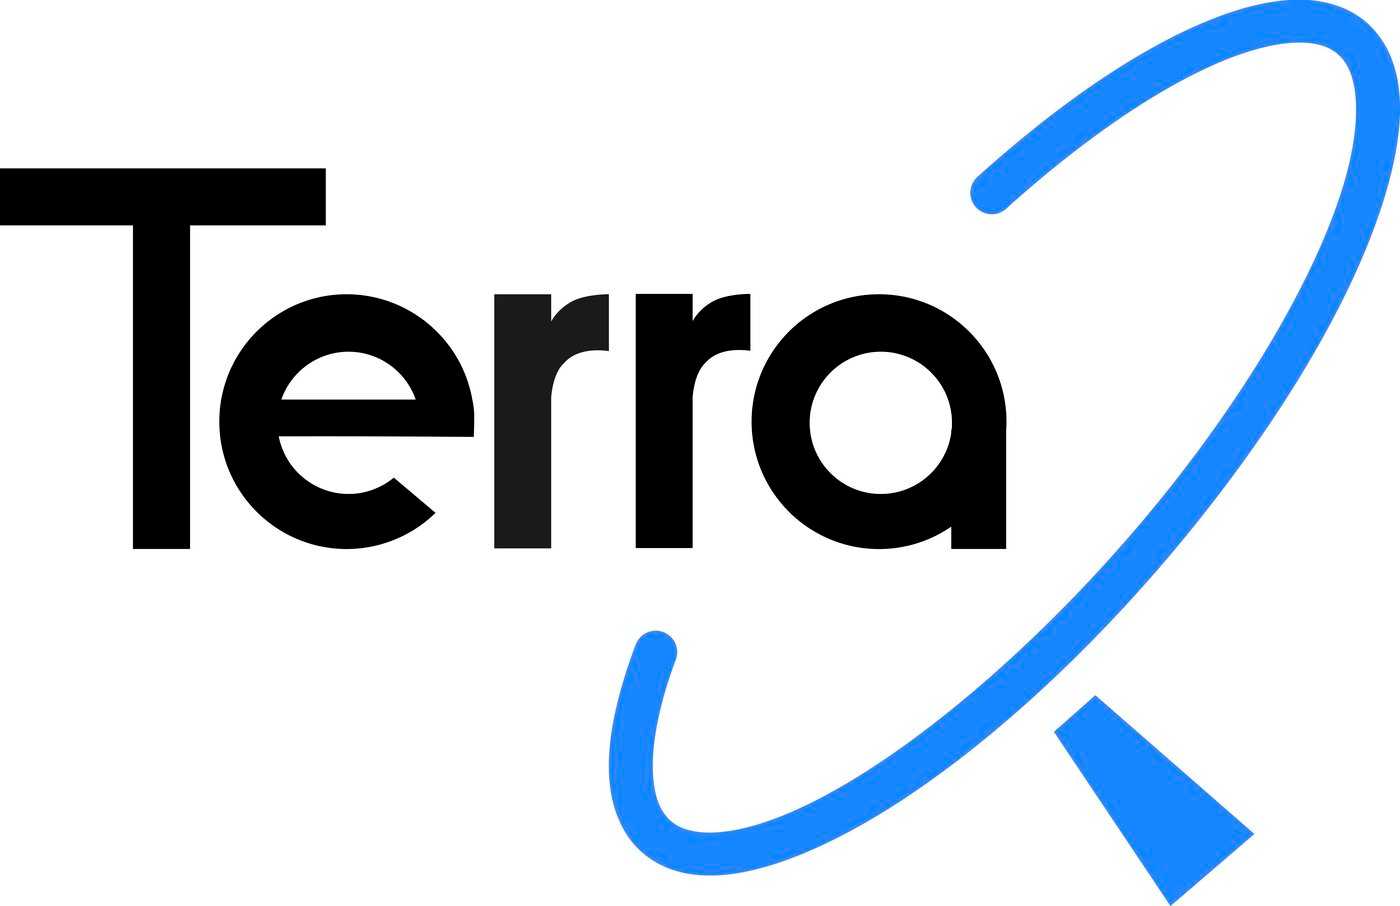 News-Image 55 of: German Research Foundation supports new collaborative research center TerraQ